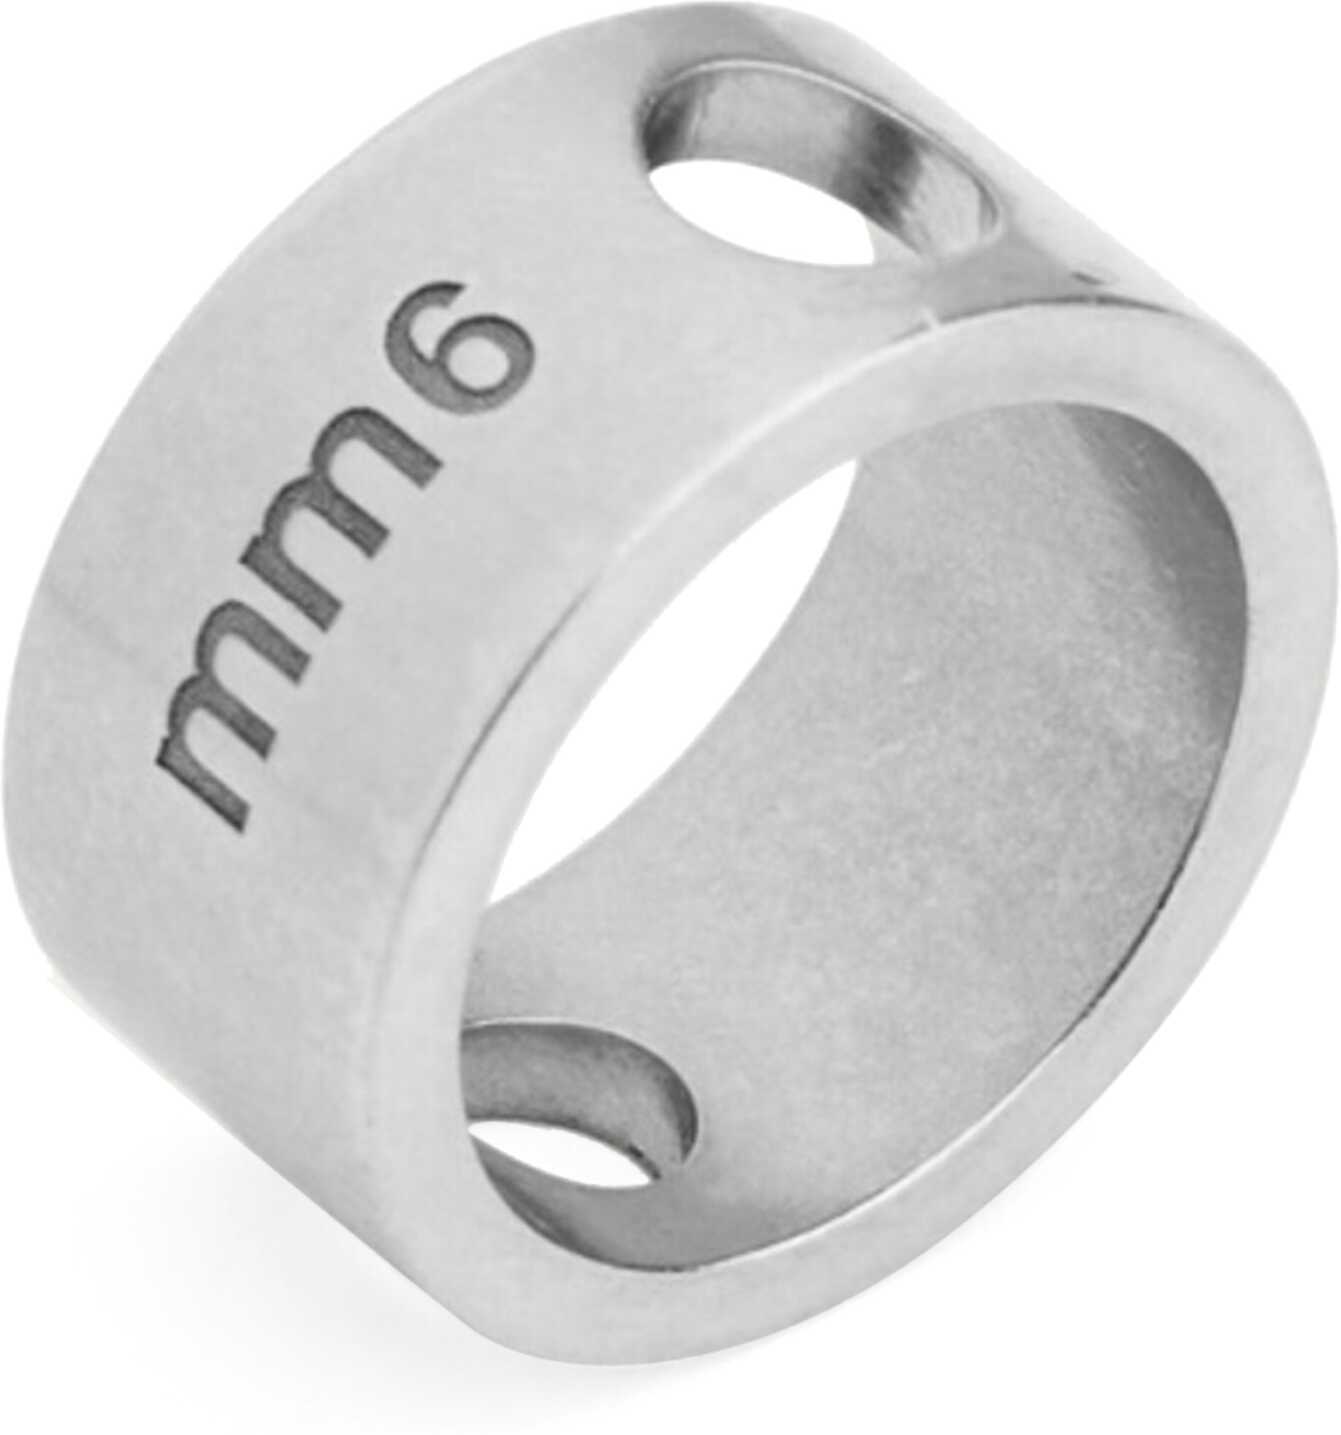 MM6 Maison Margiela Ring With Holes SILVER image 0